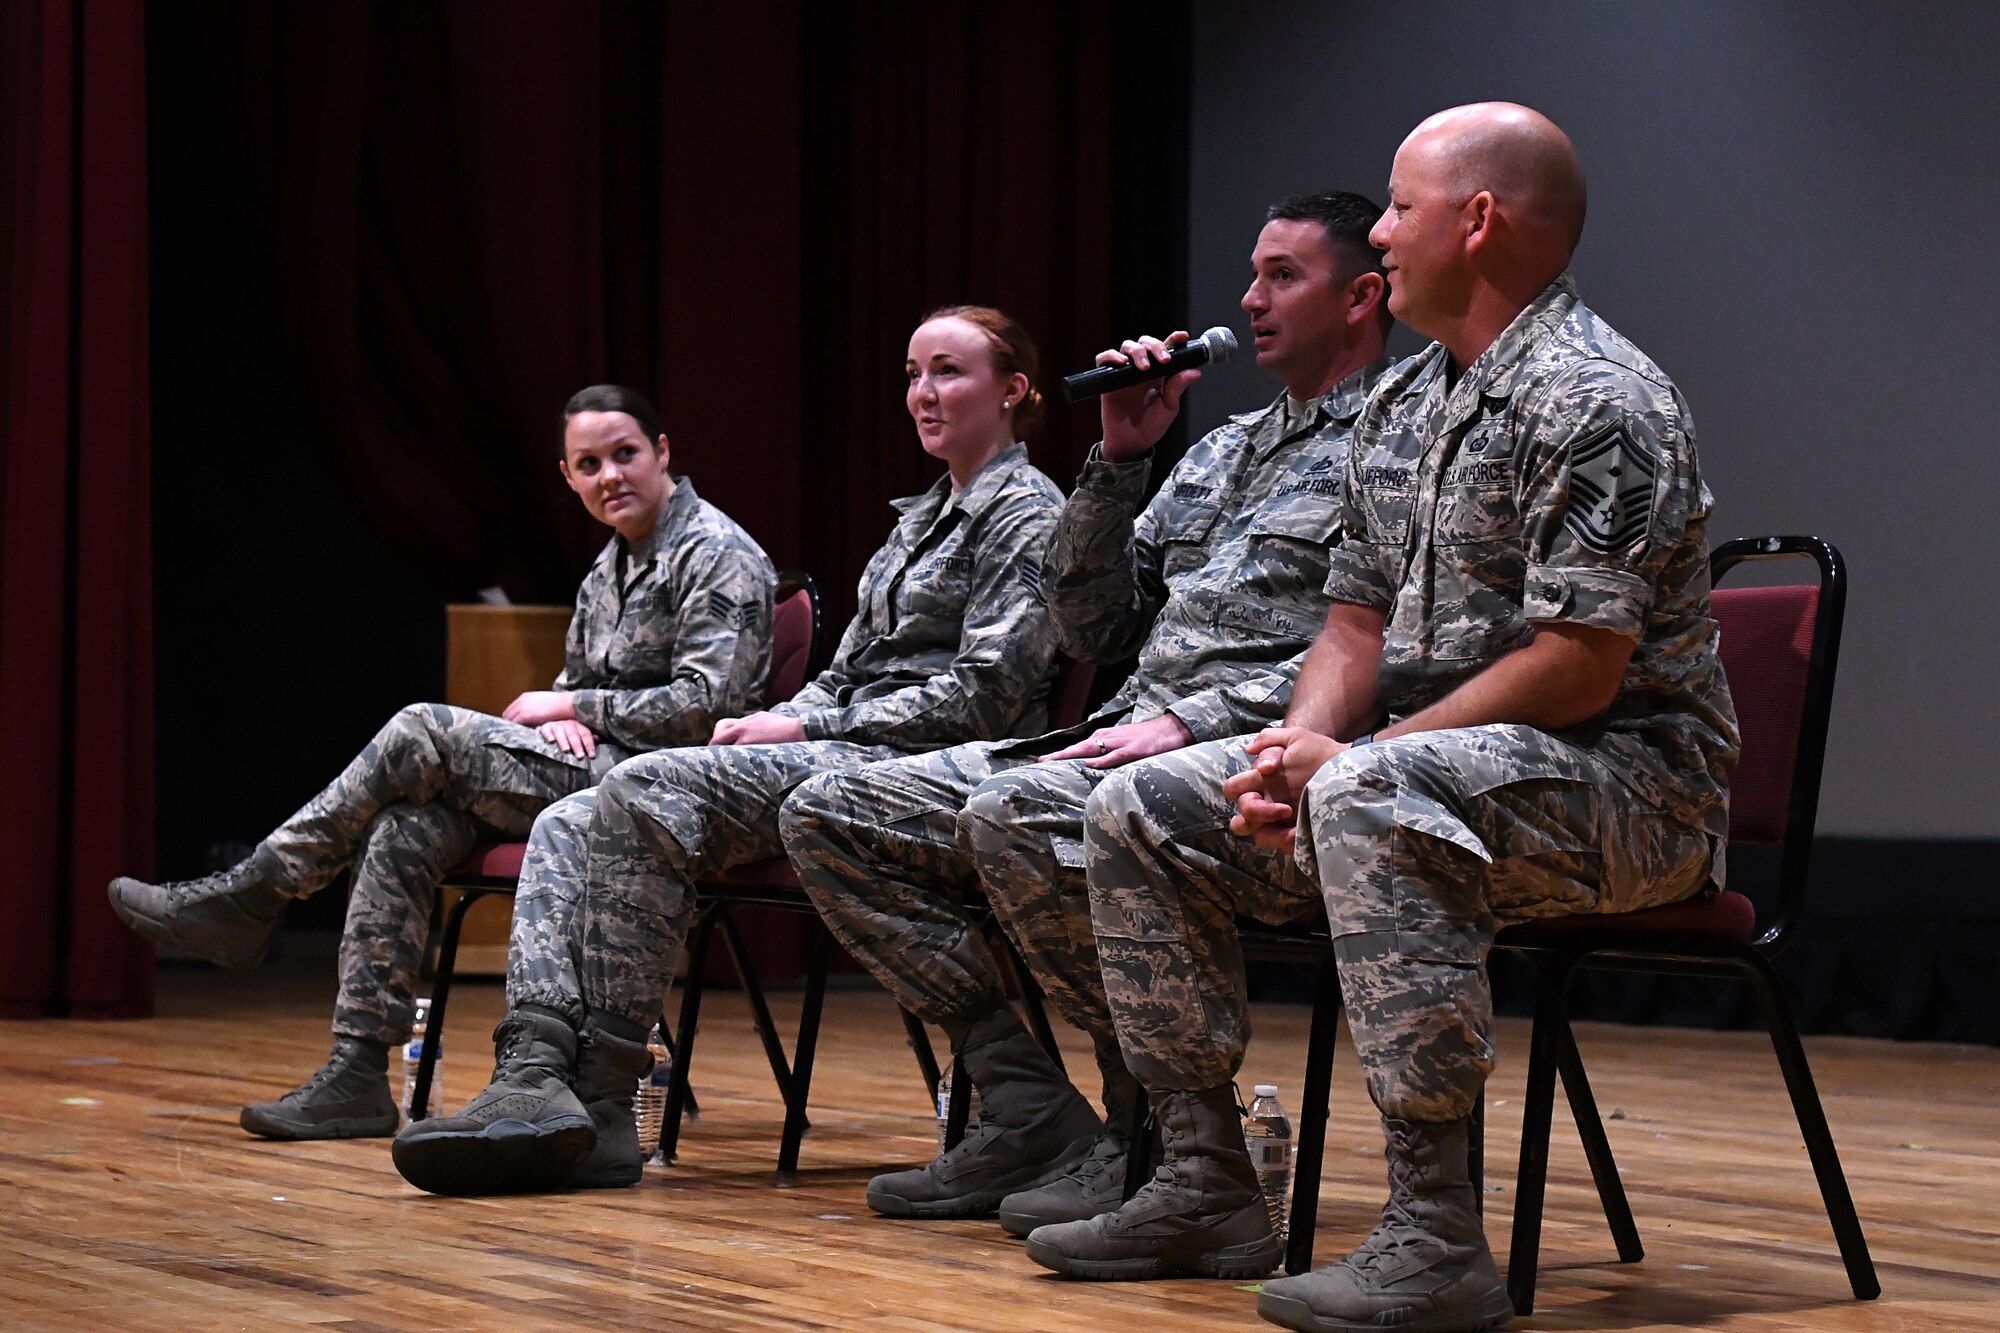 U.S. Air Force Master Sgt. Jason Burdett, 81st Security Forces Squadron first sergeant, answers a question during the question and answer portion of the Airmen Building Airmen Symposium at the Welch Theater at Keesler Air Force Base, Mississippi, April 6, 2018. The symposium also included a guest speaker and a video. The symposium was held to empower Airmen and help them understand the impact they have on the future of the Air Force. (U.S. Air Force photo by Airman 1st Class Suzie Plotnikov)